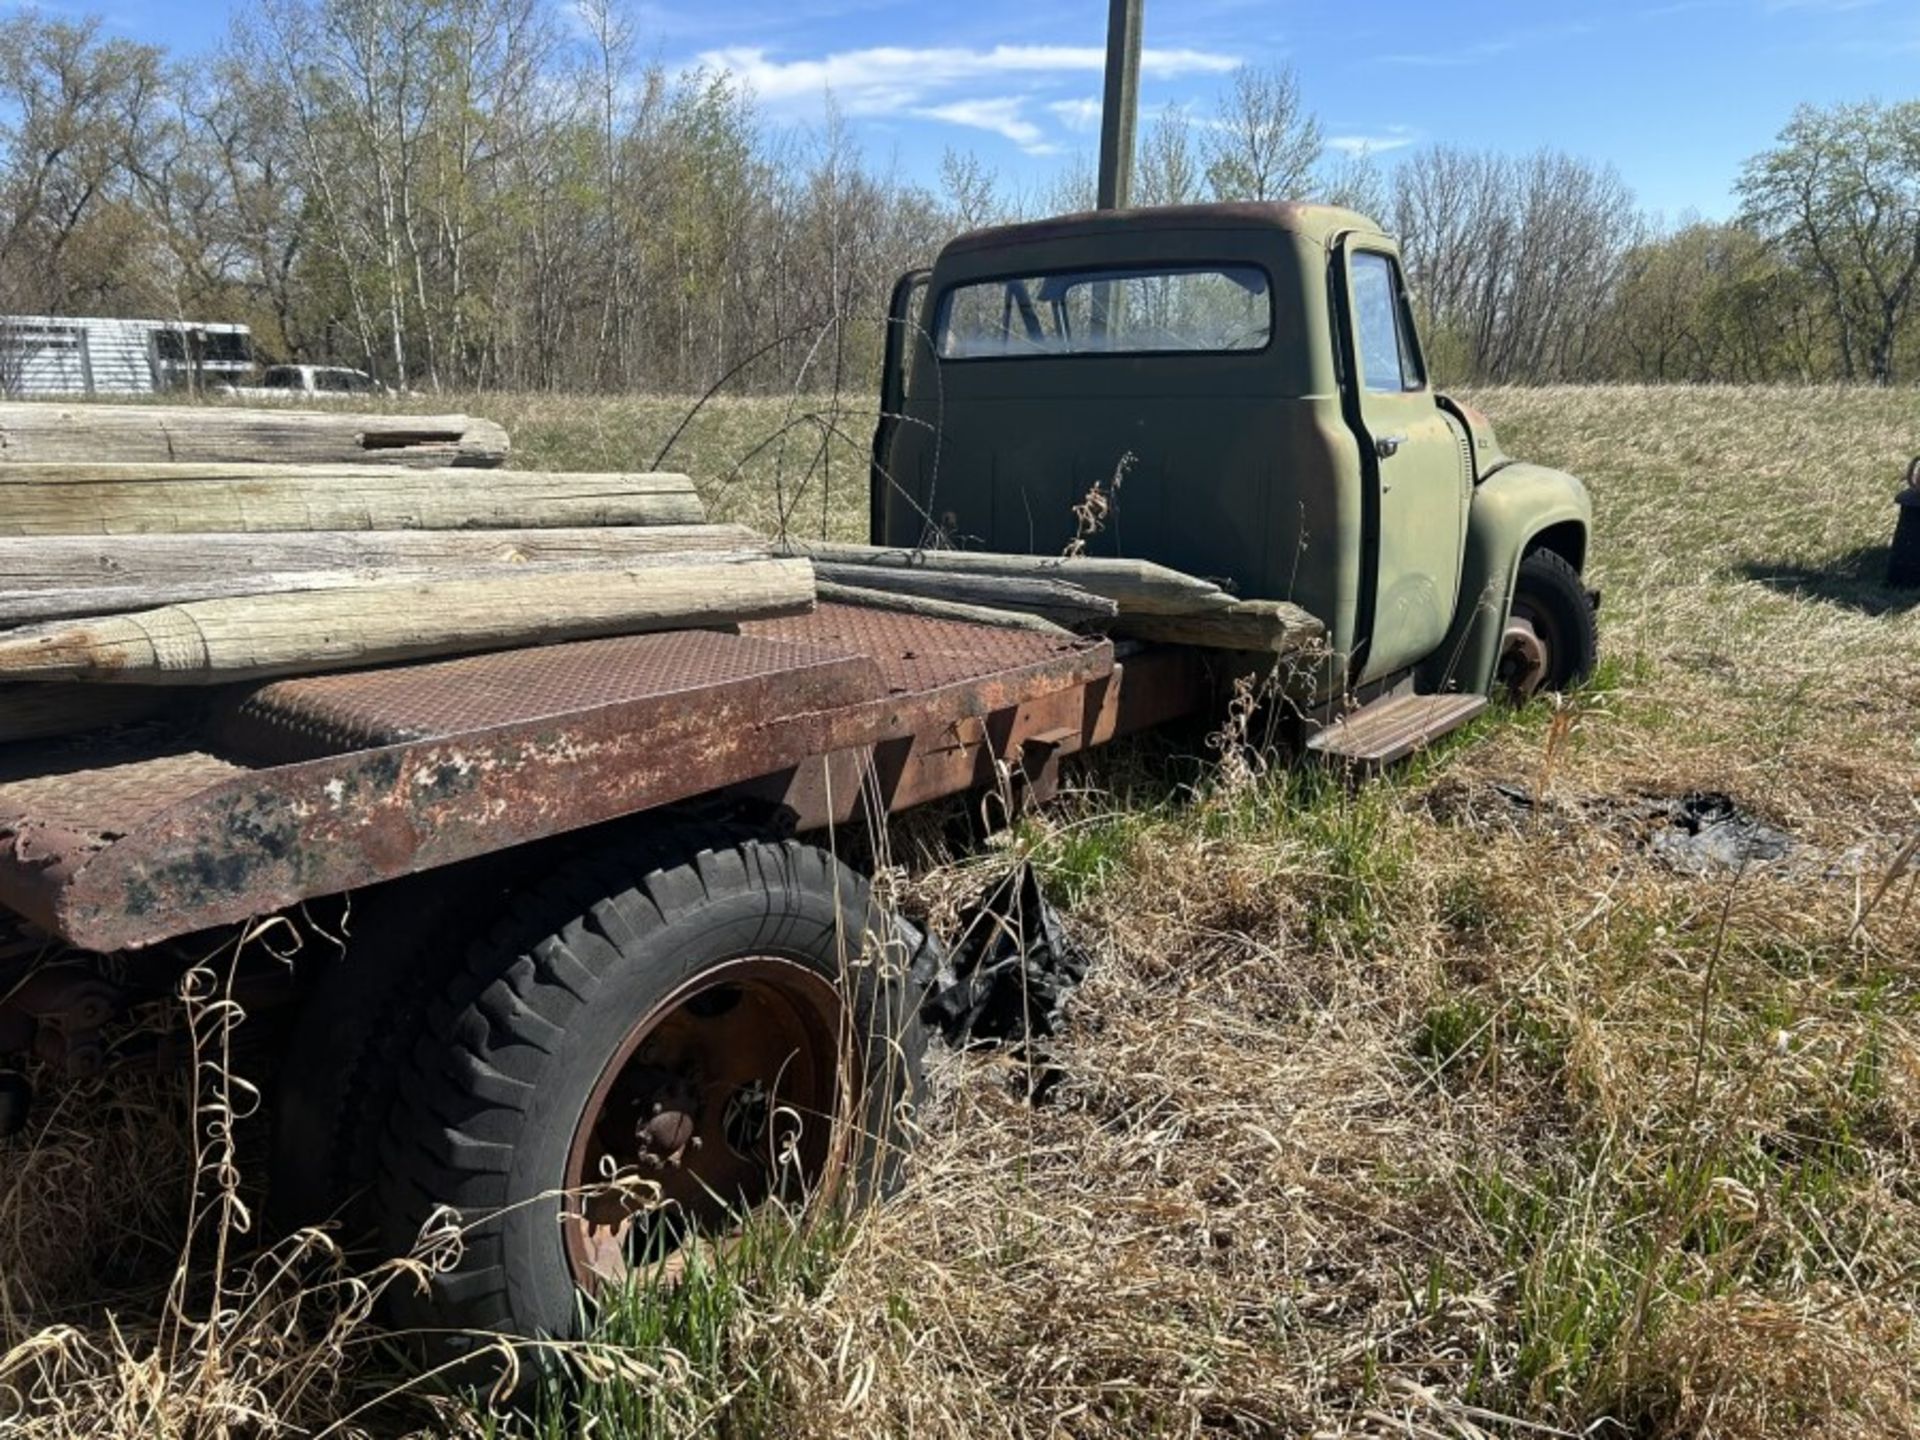 1956 FORD F600 CAB & CHASSIS W/STD TRANS, V8 ENG. (PROJECT) - LOCATED 22 KM EAST OF PONOKA - Image 4 of 7